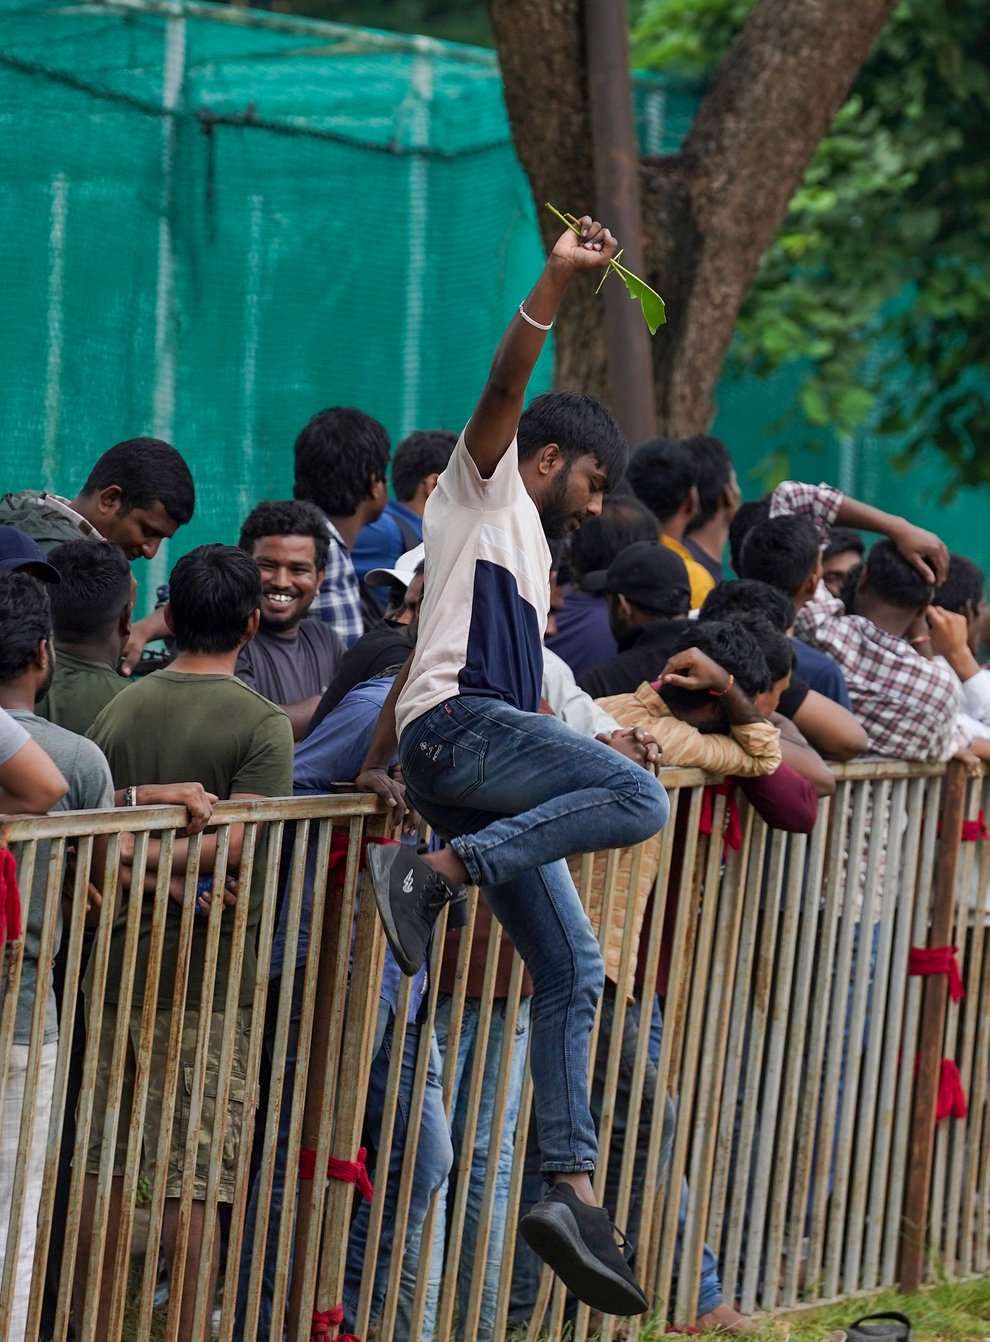 A man jumps a railing to take a break as people line up to buy tickets for the third Twenty20 cricket match between India and Australia at Gymkhana grounds in Hyderabad, India (Mahesh Kumar/AP)